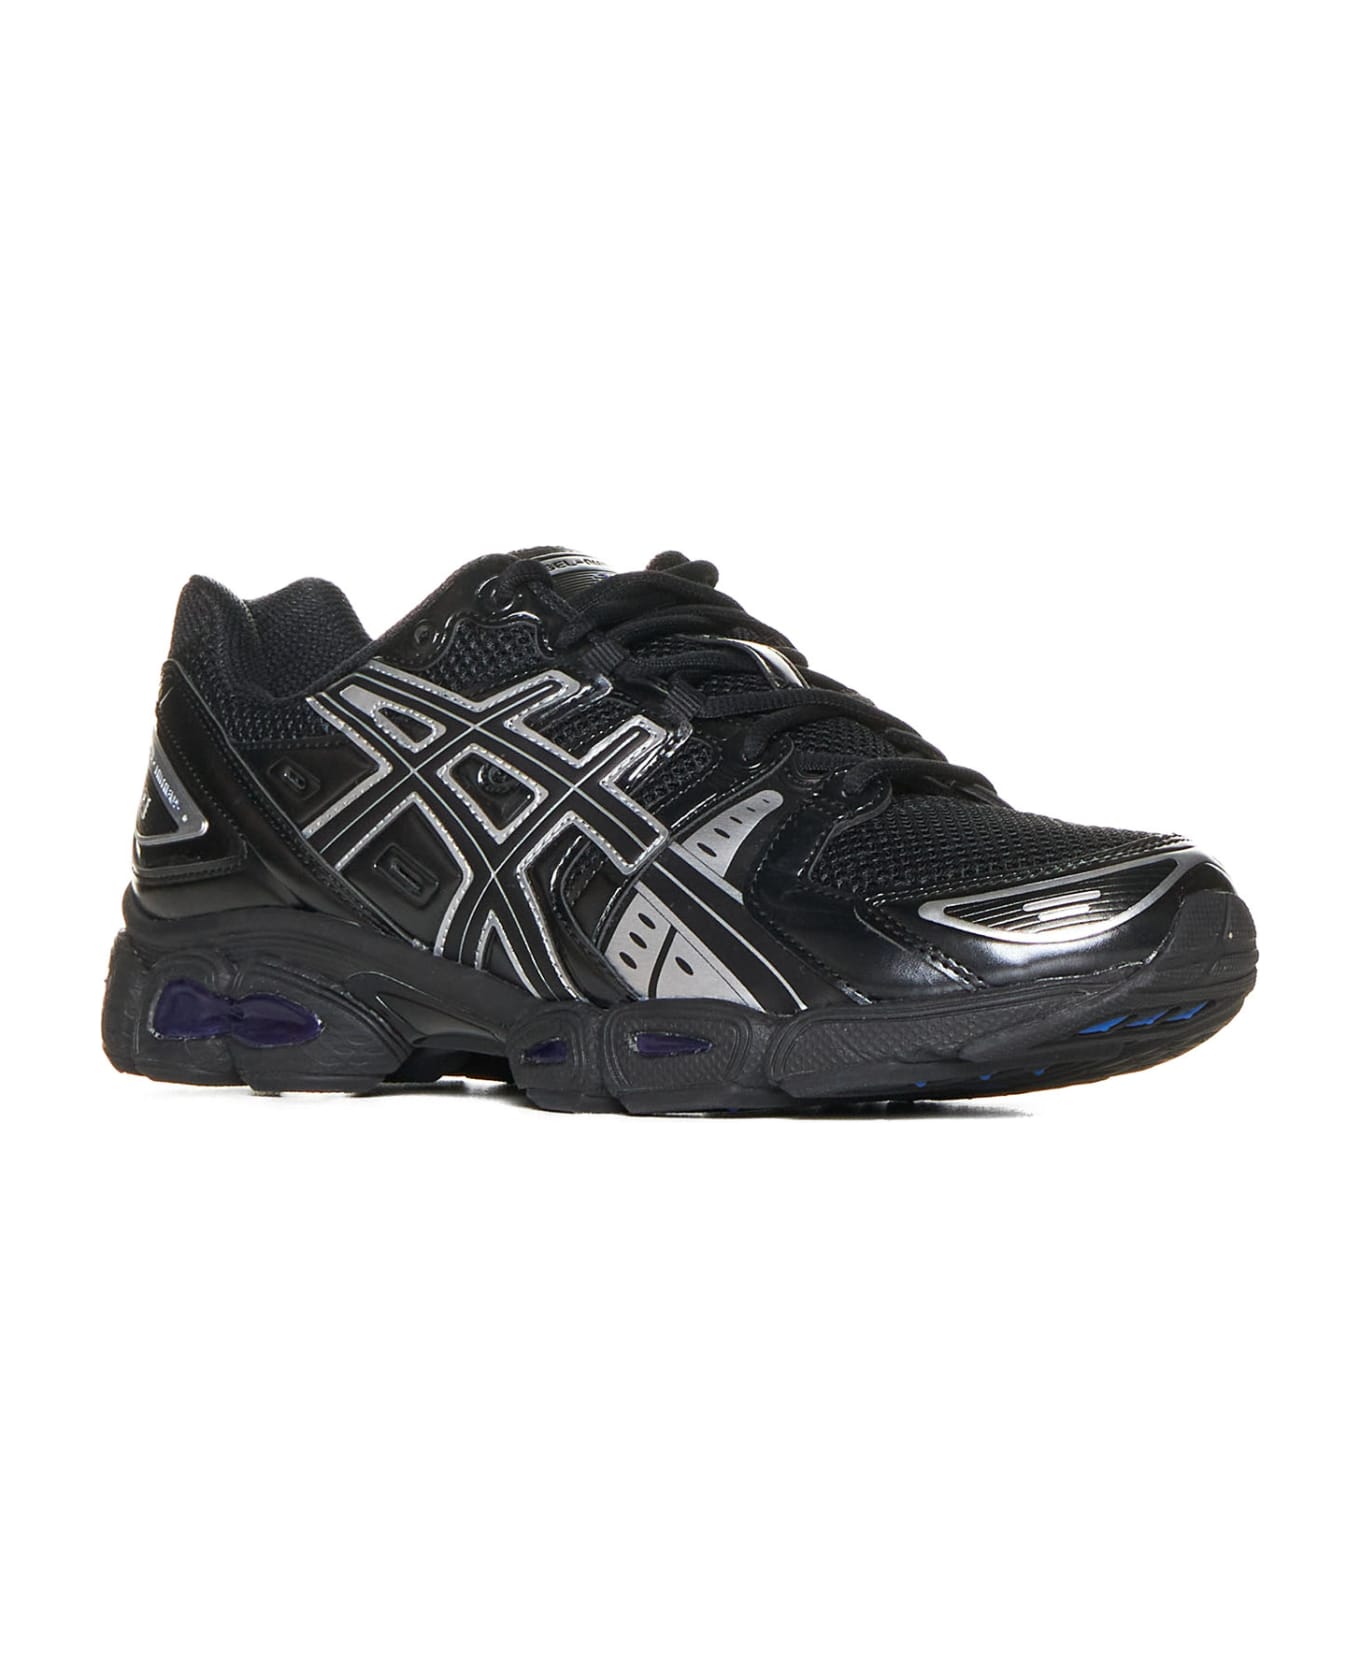 Asics Sneakers - Black/pure silver